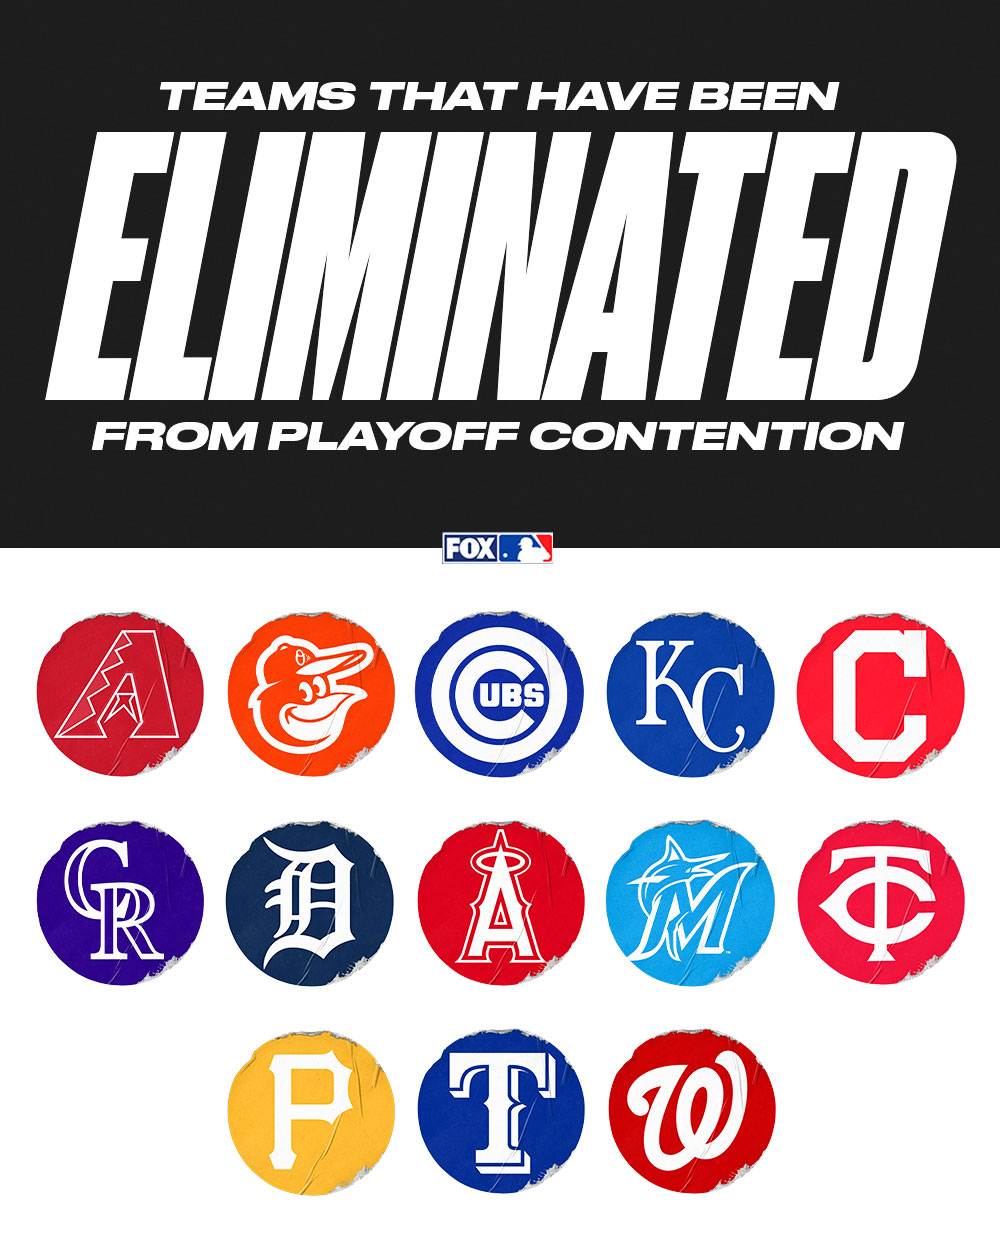 FOX Sports MLB on Twitter "Thirteen teams have been eliminated from